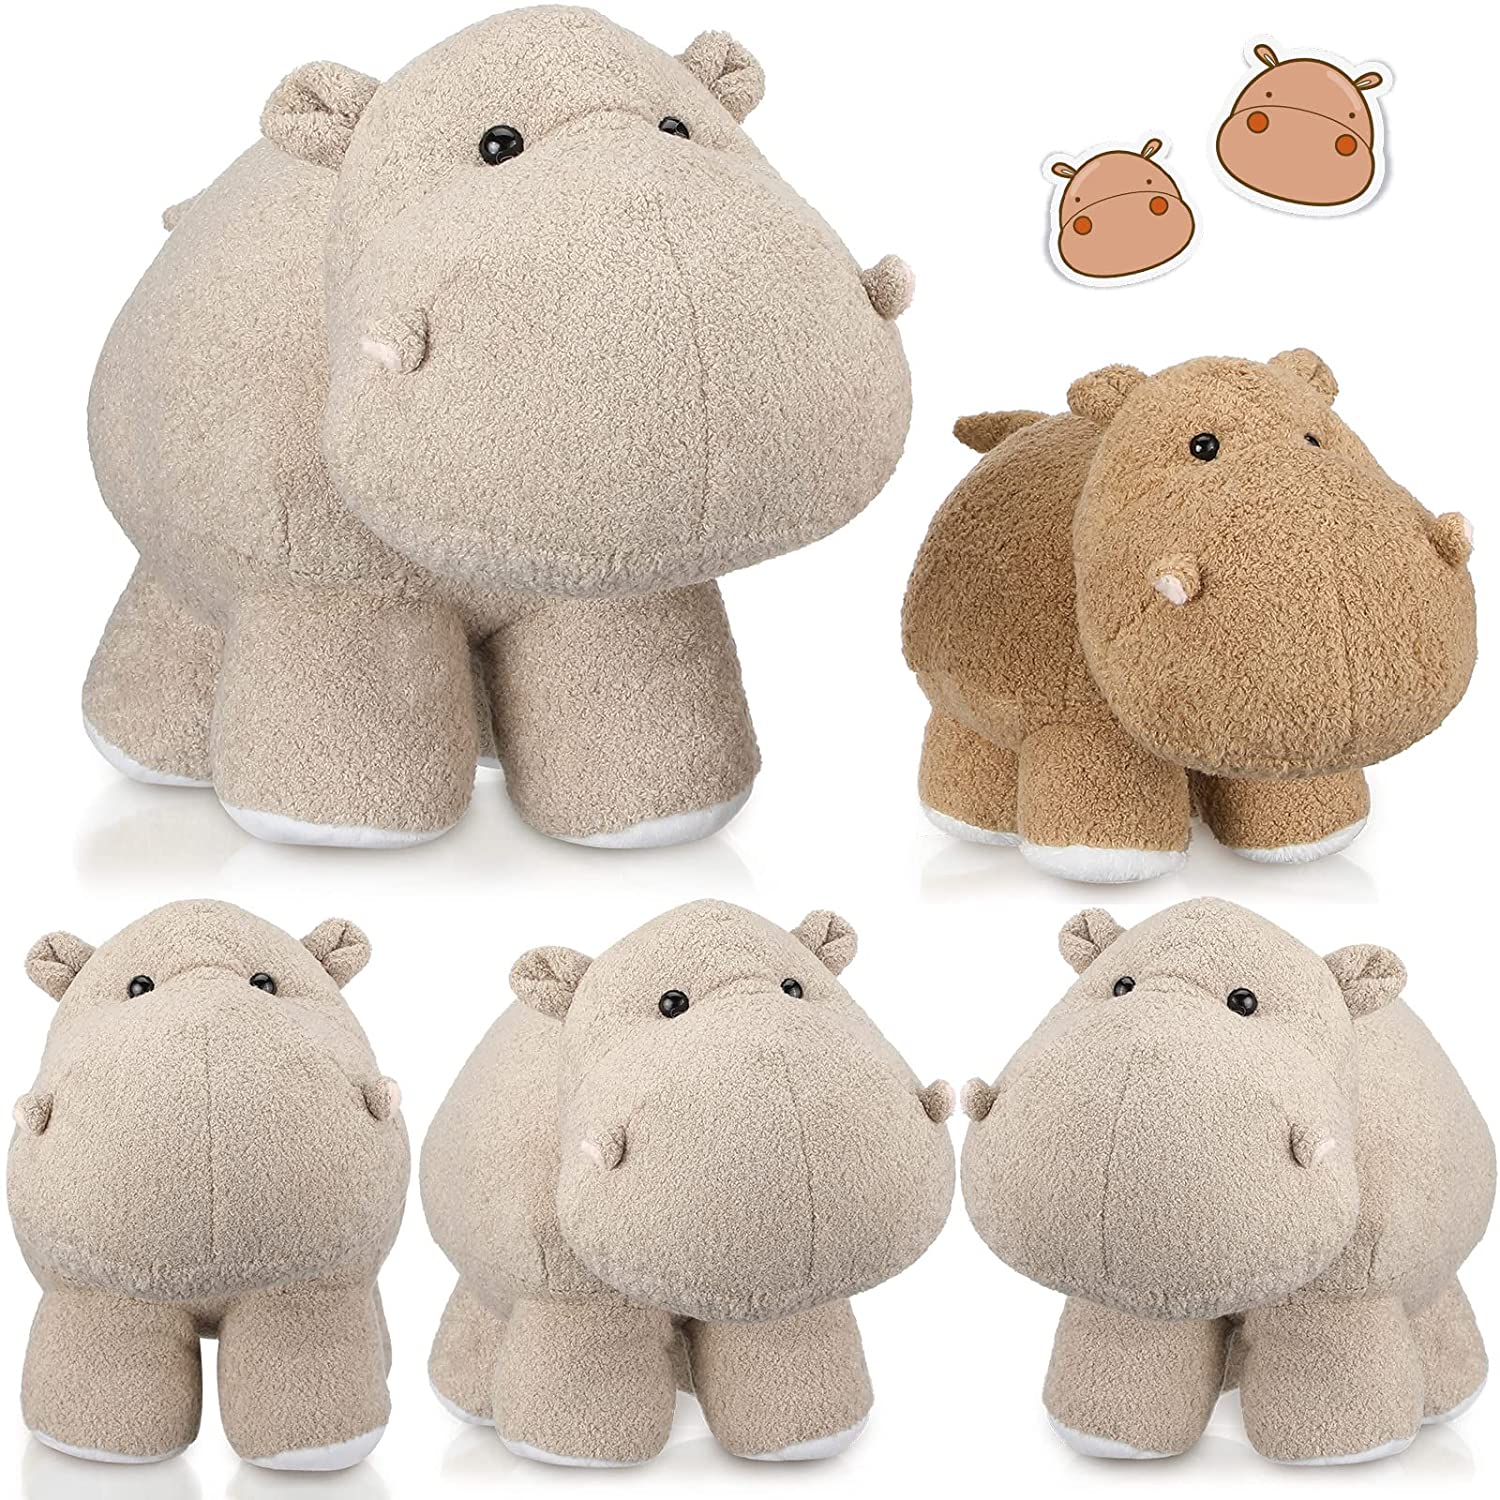 Gifts Mother and Baby Hippo Soft Plush Animal Hippos Gift Stuffed Animals 